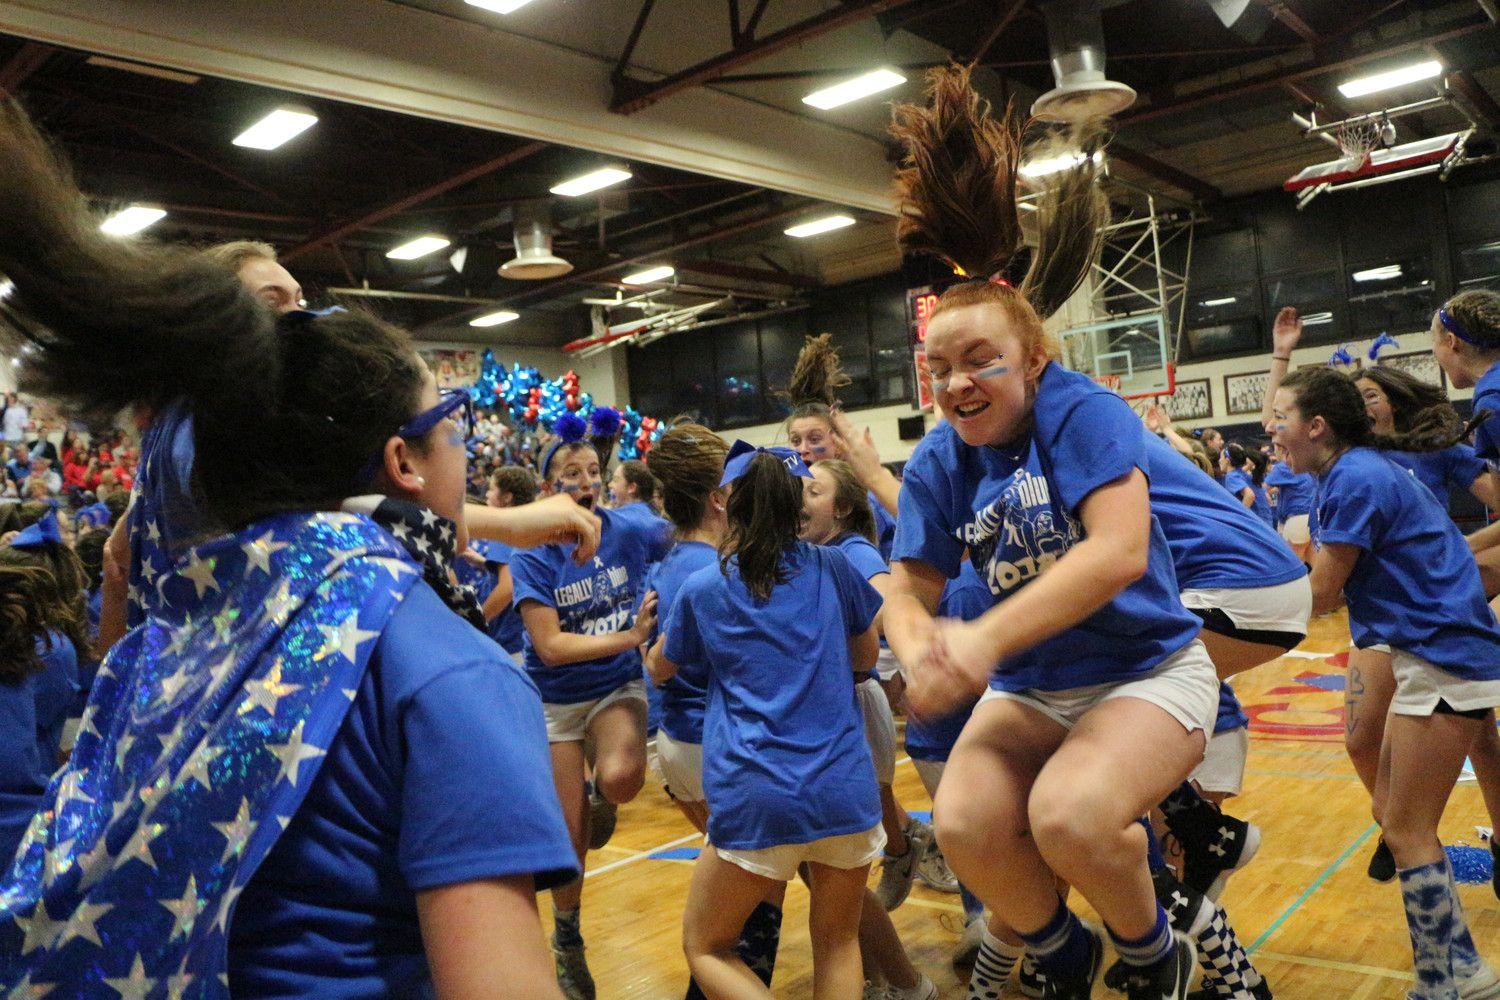 Red and Blue in High School Logo - Blue Team victory at South Side High School! | Herald Community ...